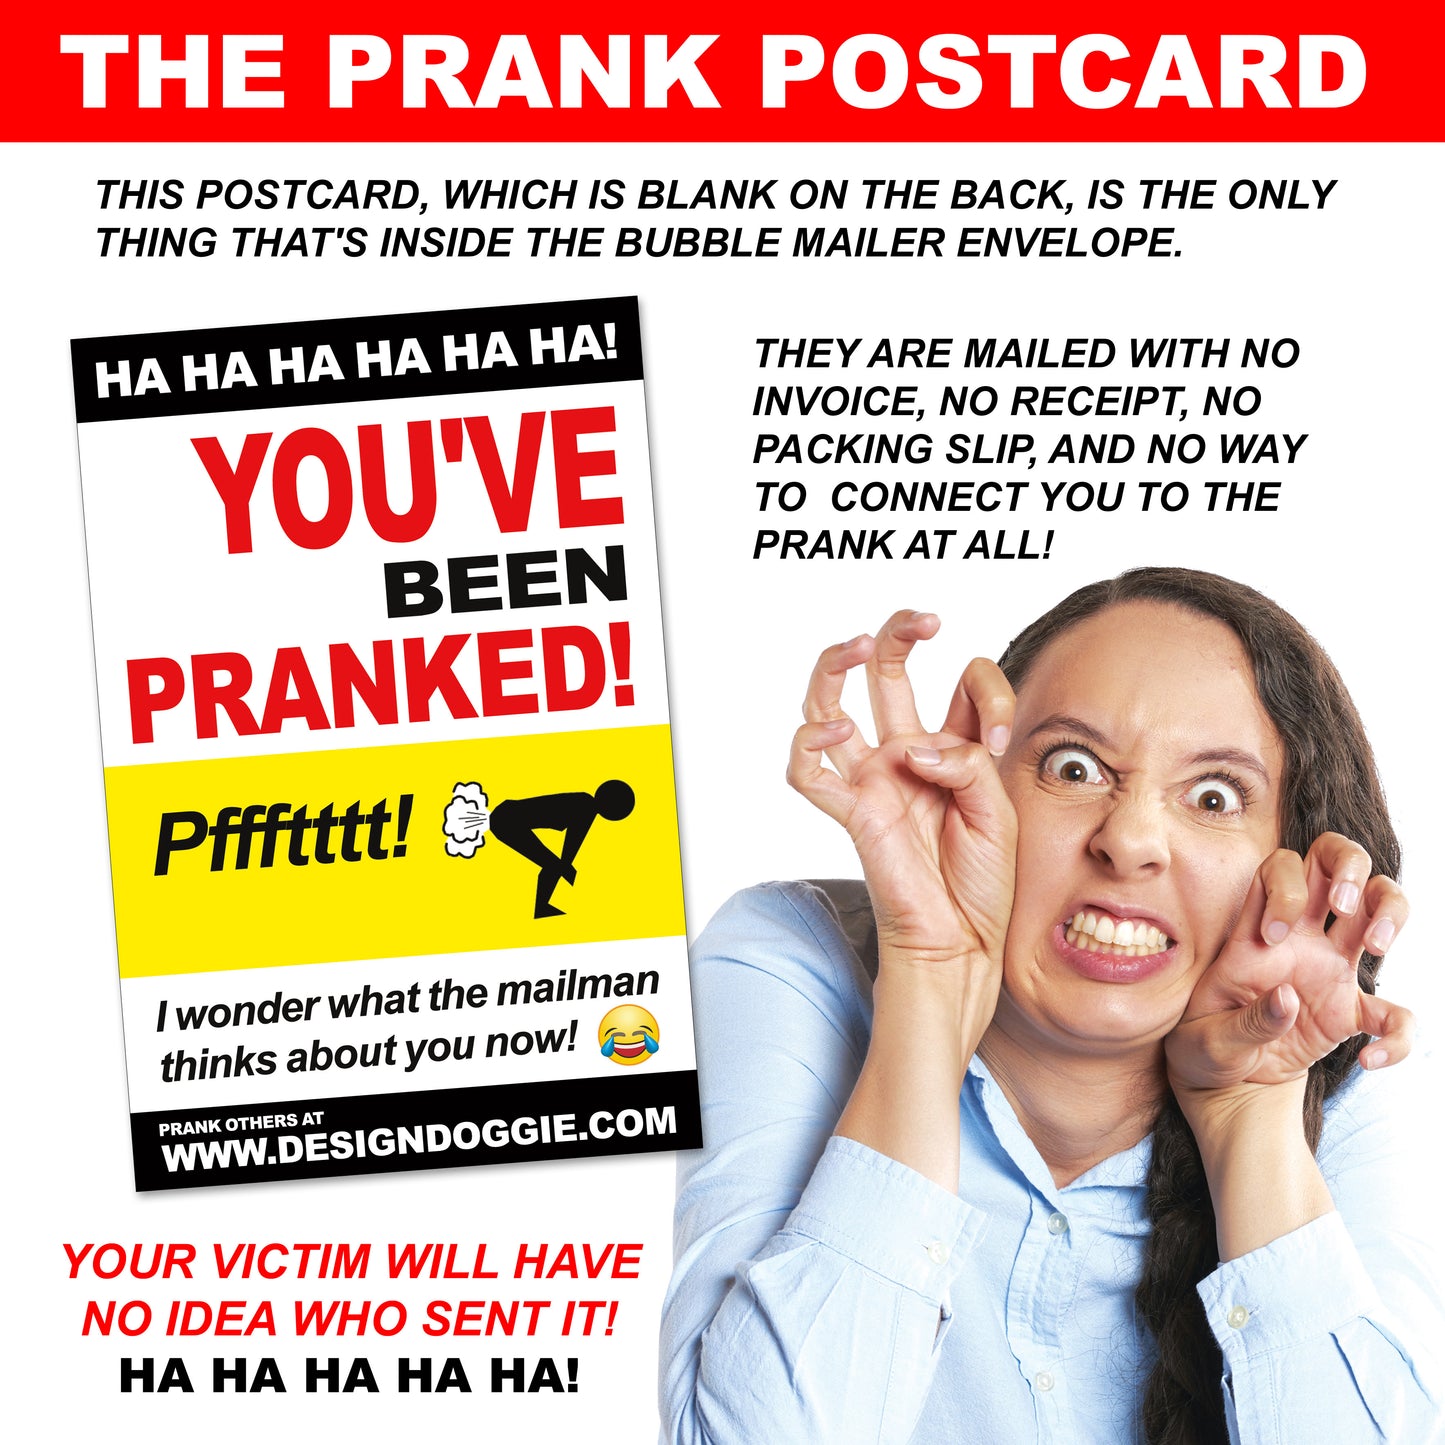 Gay Camp Resort embarrassing prank envelope gets mailed directly to your victims 100% anonymously!